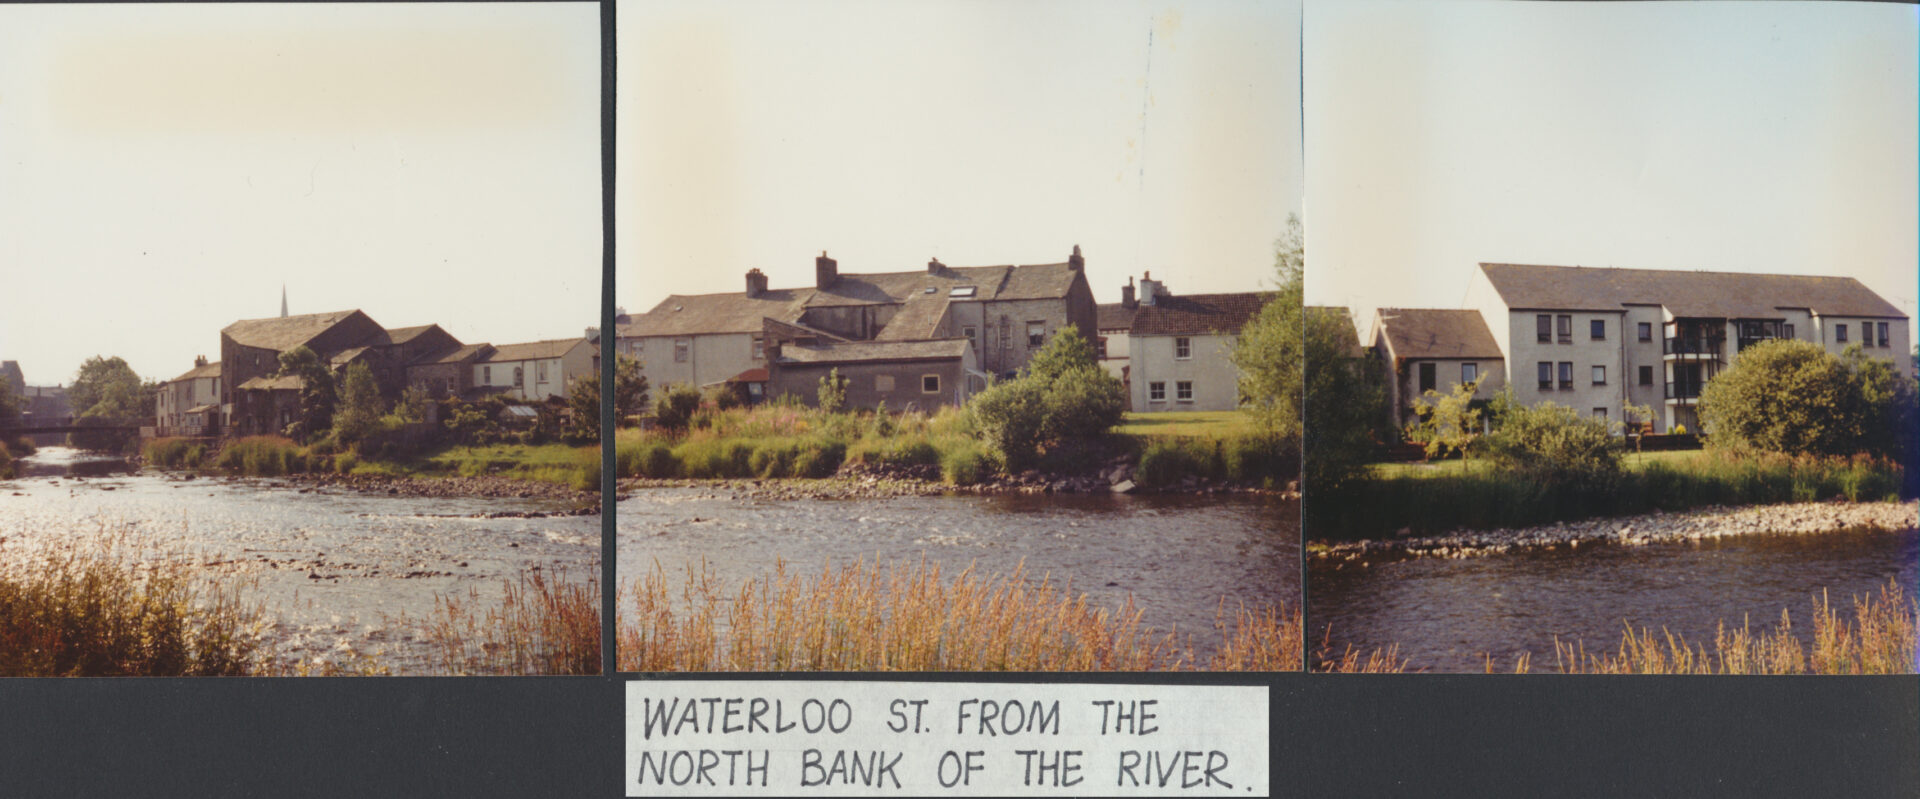 Waterloo Street from the north bank of the river 1989 photo scaled